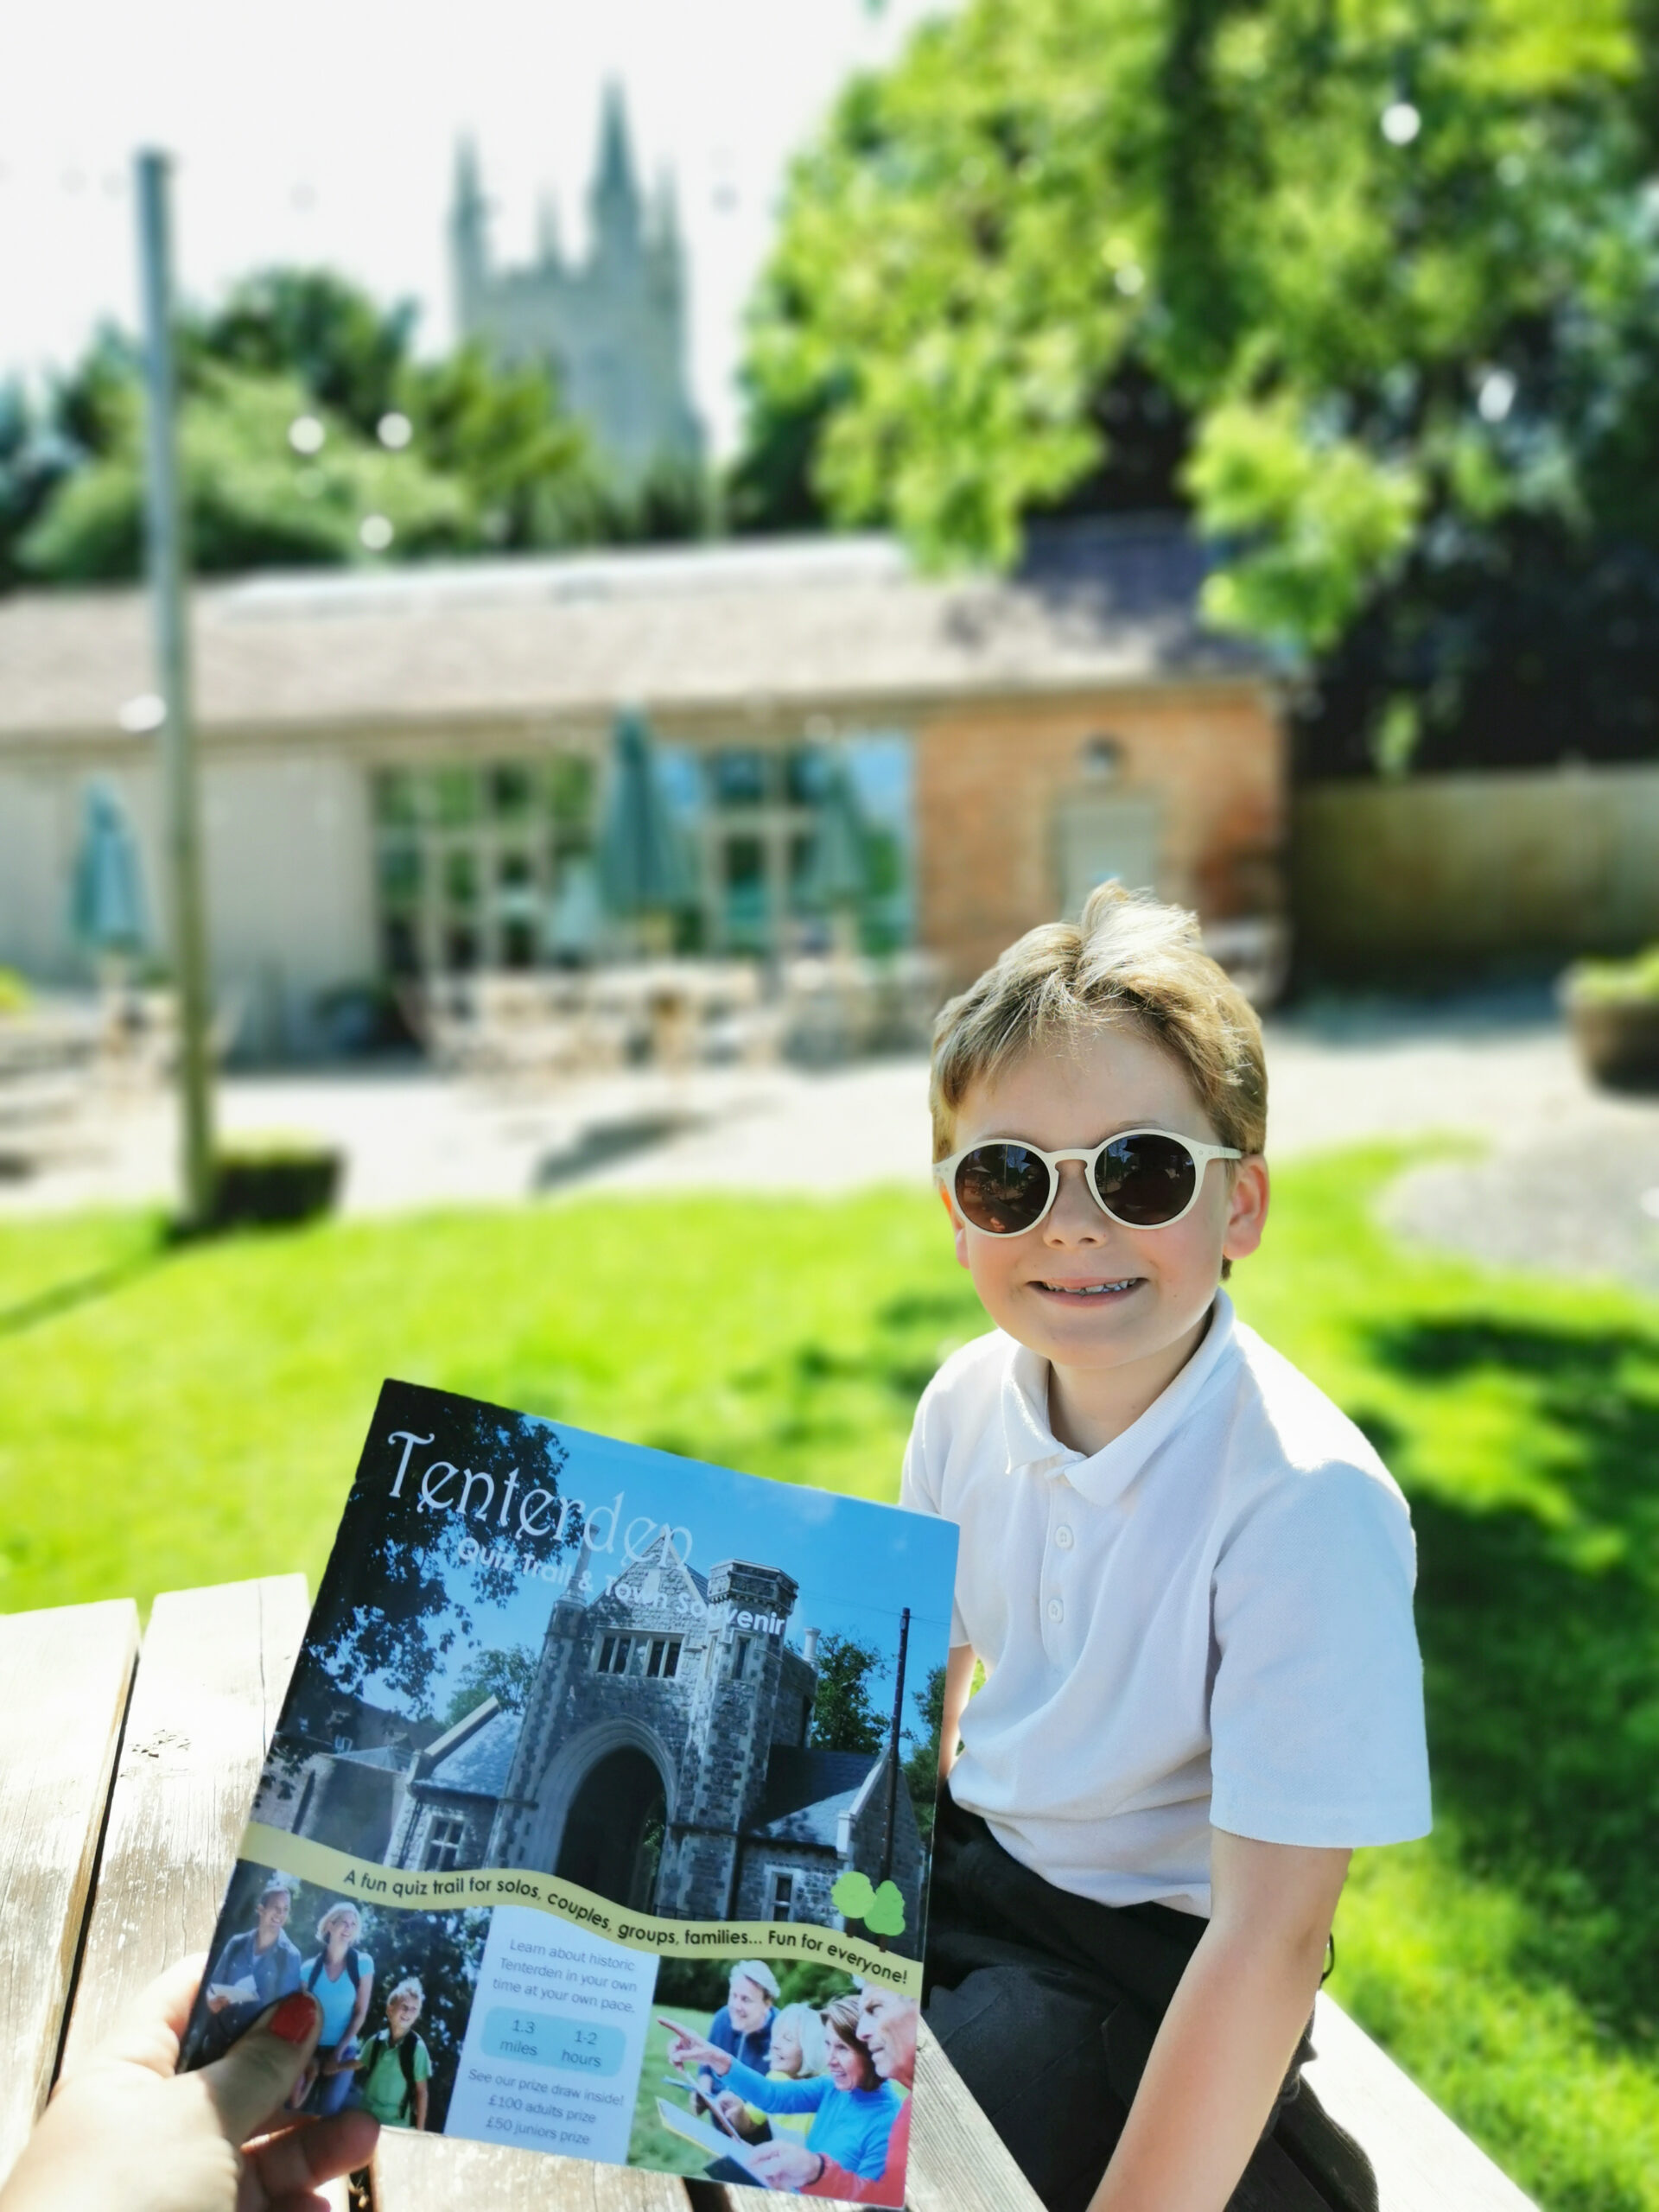 Quiz Trail, Tenterden Quiz Trail, Fun Activity, Kids Activity, Explore and Learn, Family Days Out, Life in Kent, Educational Activity, Outdoors Activity, The Frenchie Mummy, Books Review